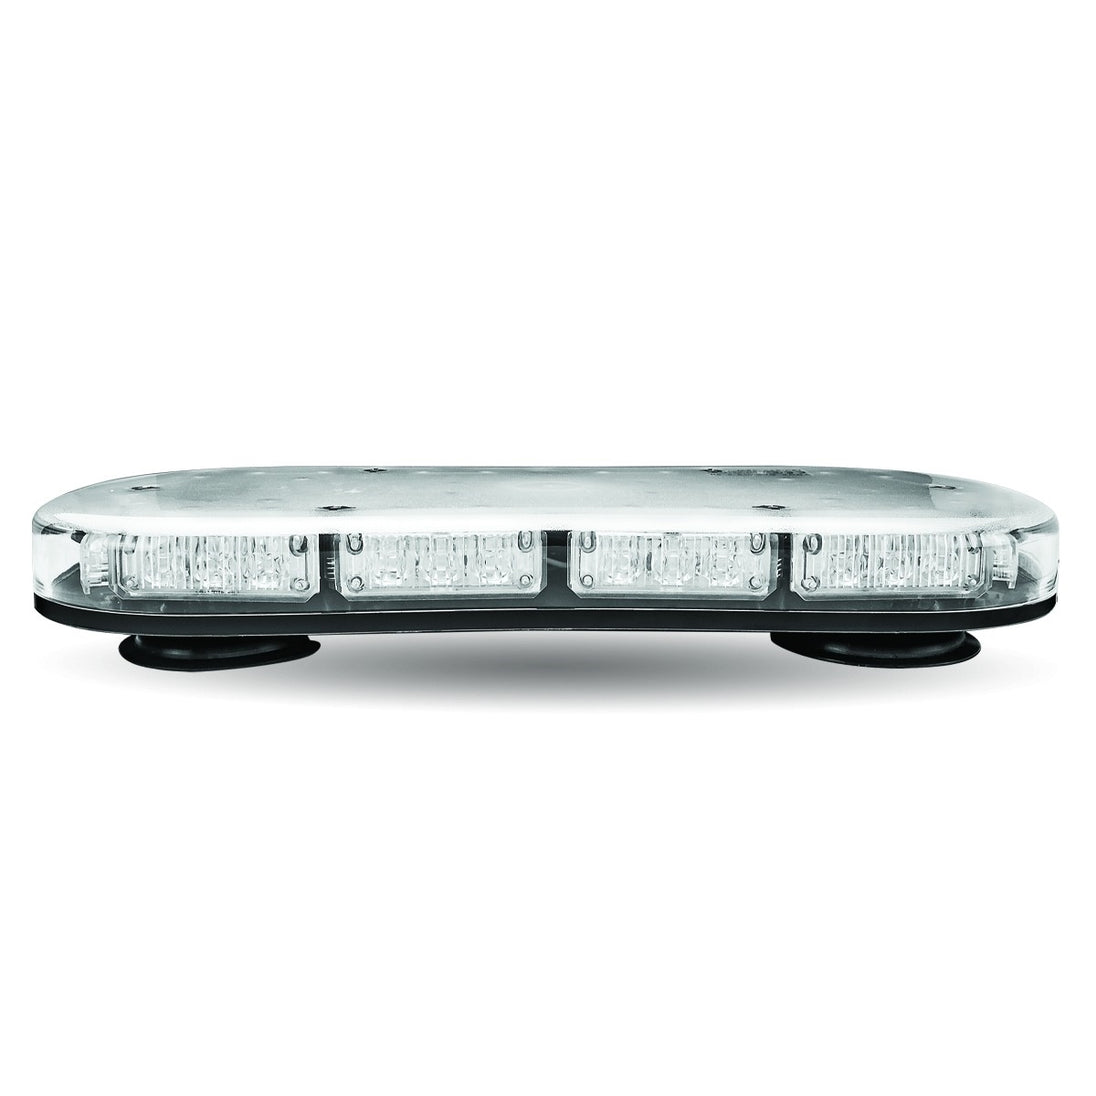 14" CLASS 1 LED LIGHT BAR WARNING LIGHT WITH 36 PATTERNS AND CIGARETTE PLUG WITH DUAL SWITCH